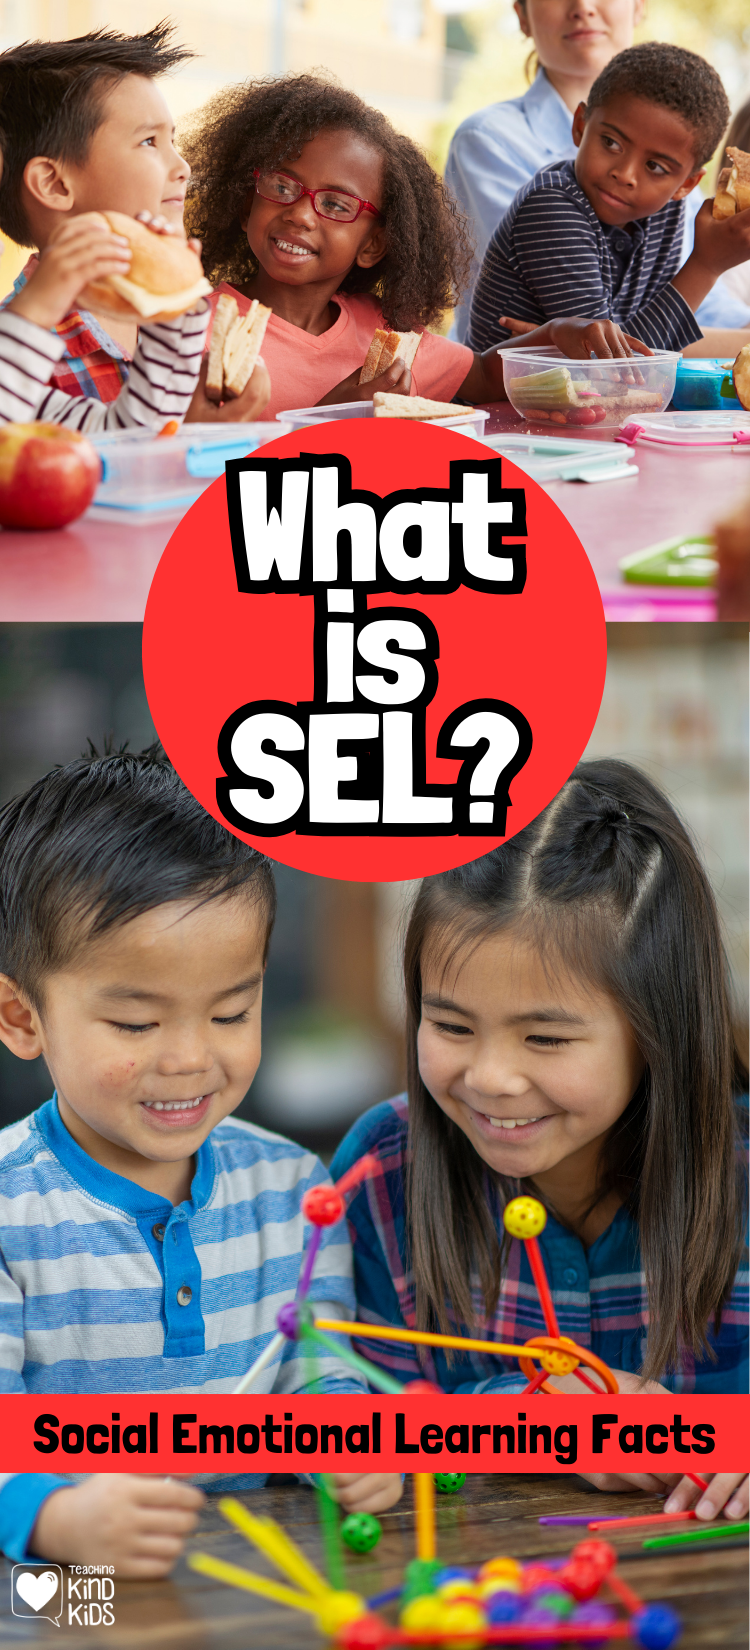 What is social emotional learning and why is it important? SEL includes these 5 essential components every kid needs to learn. 